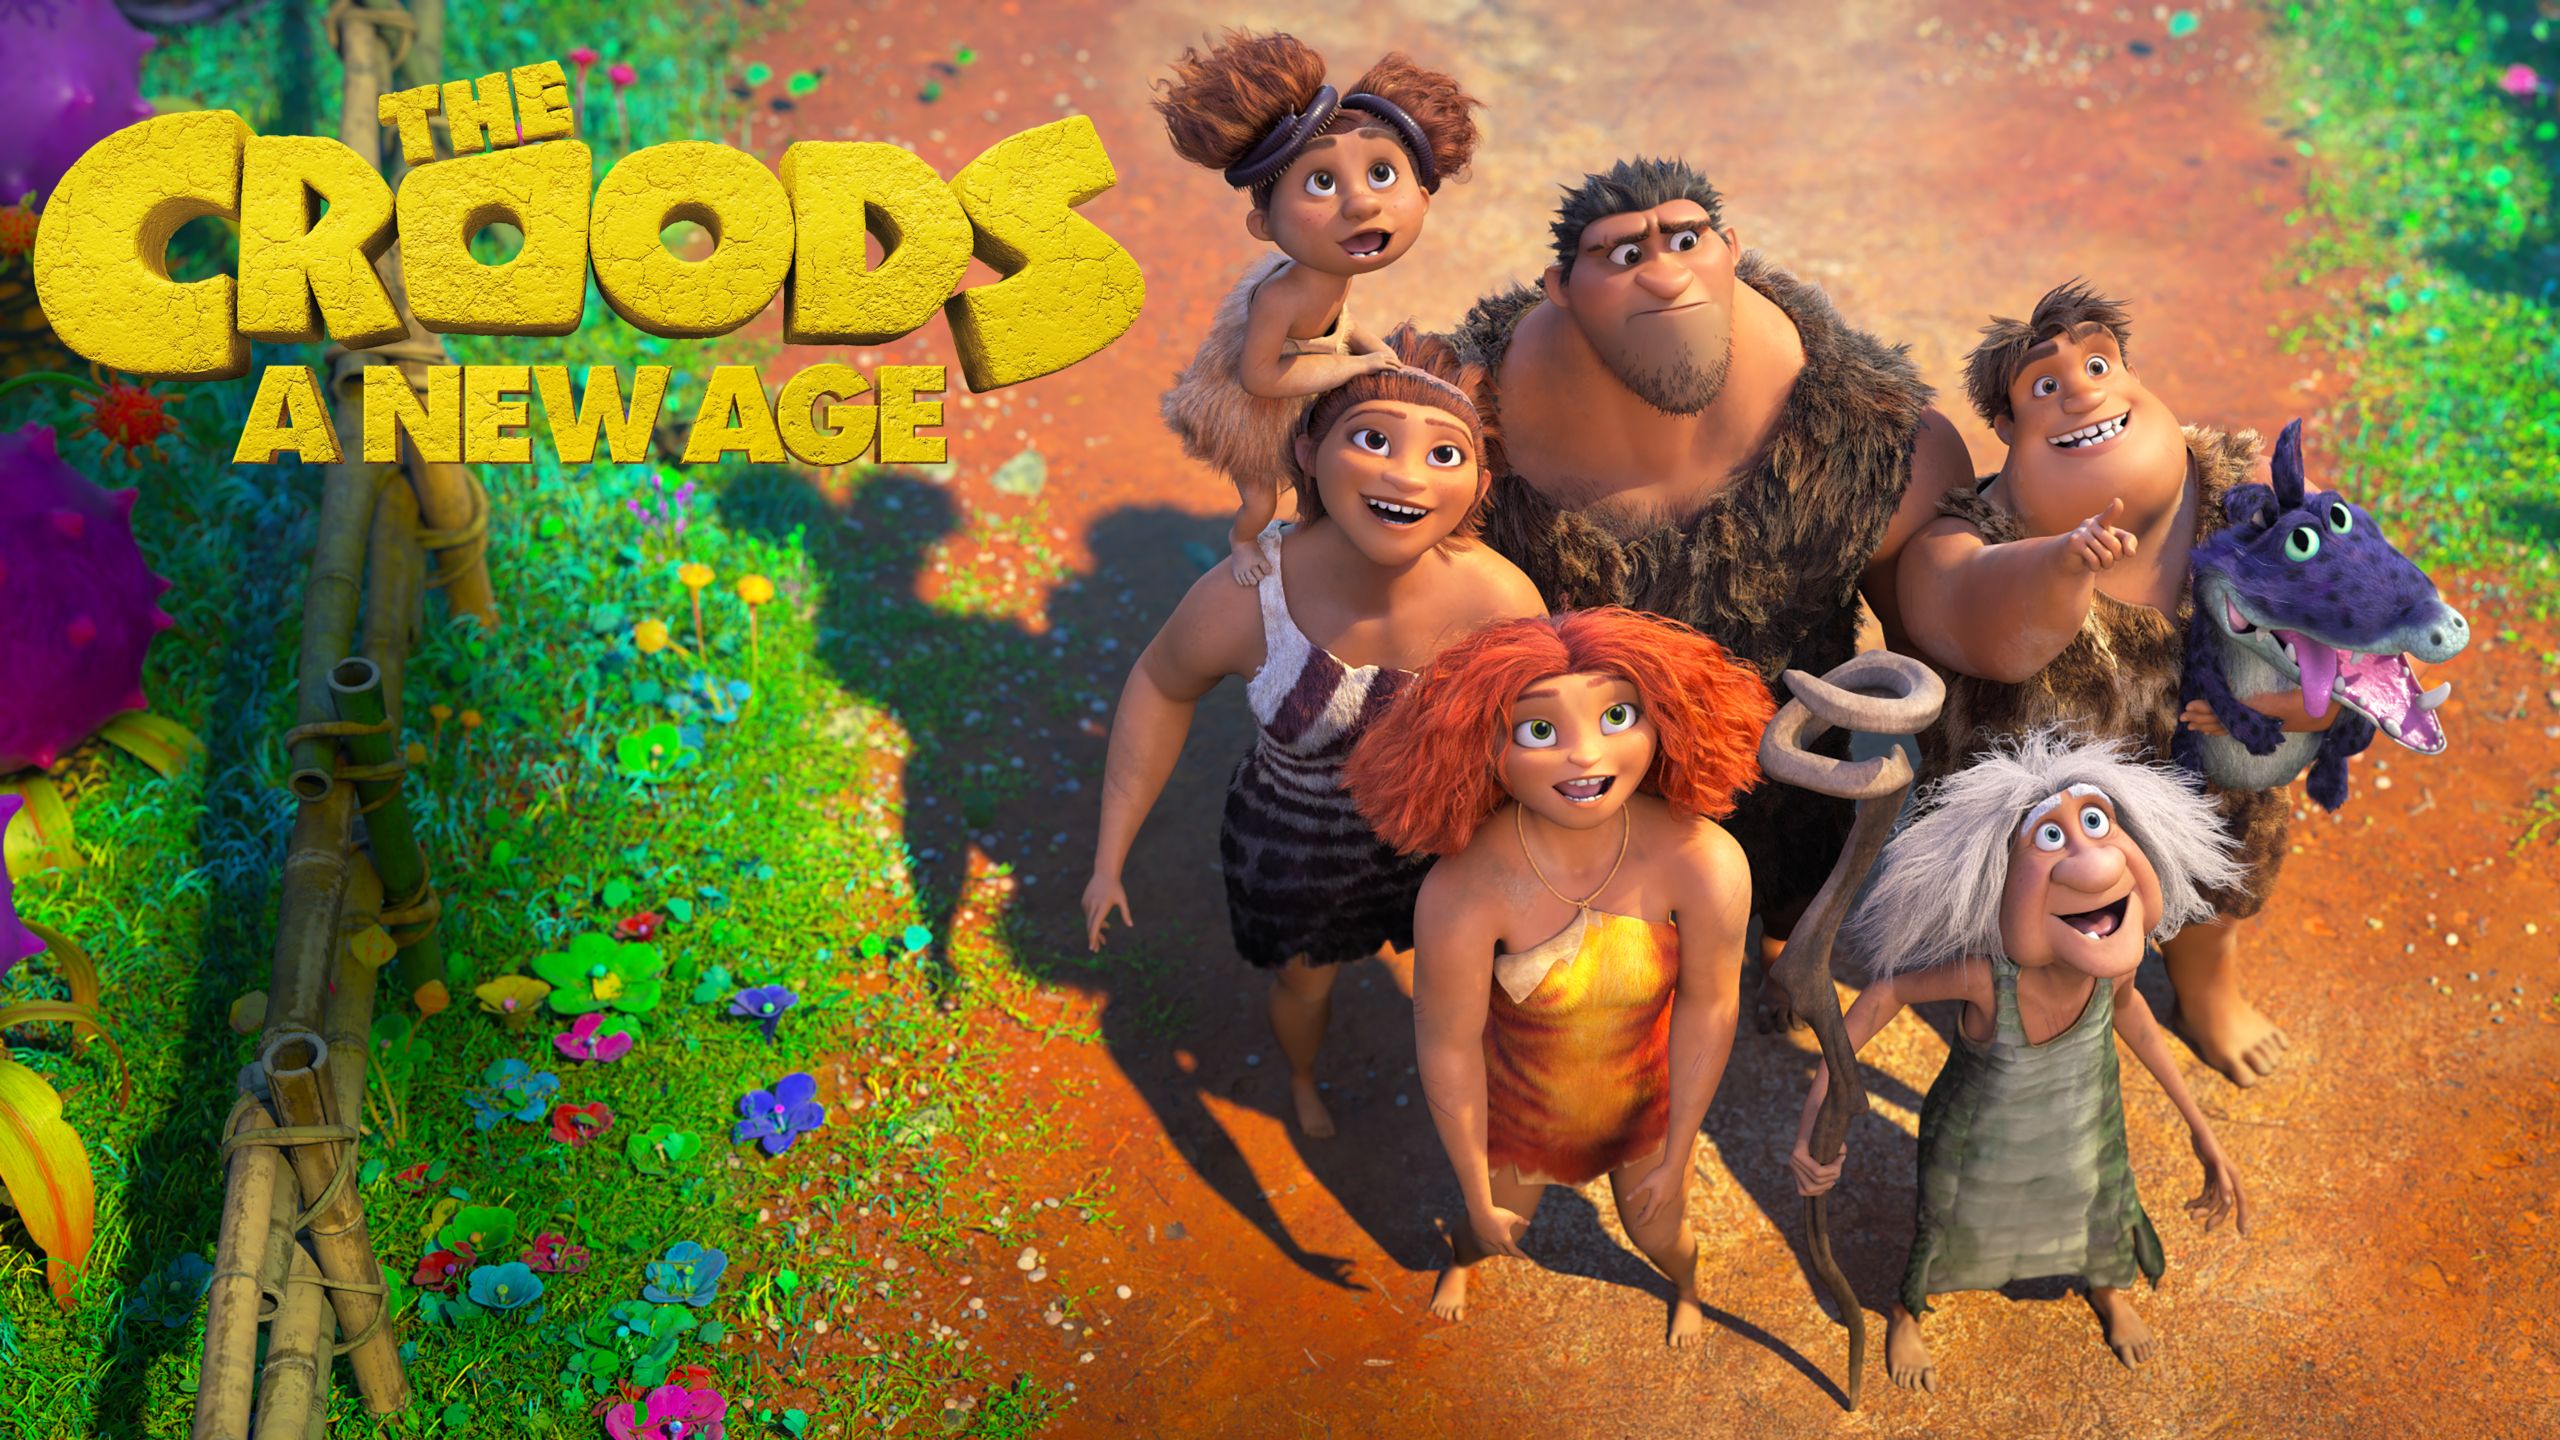 movie, the croods: a new age, eep (the croods), gran (the croods), grug (the croods), guy (the croods), sandy (the croods), thunk (the croods), ugga (the croods)